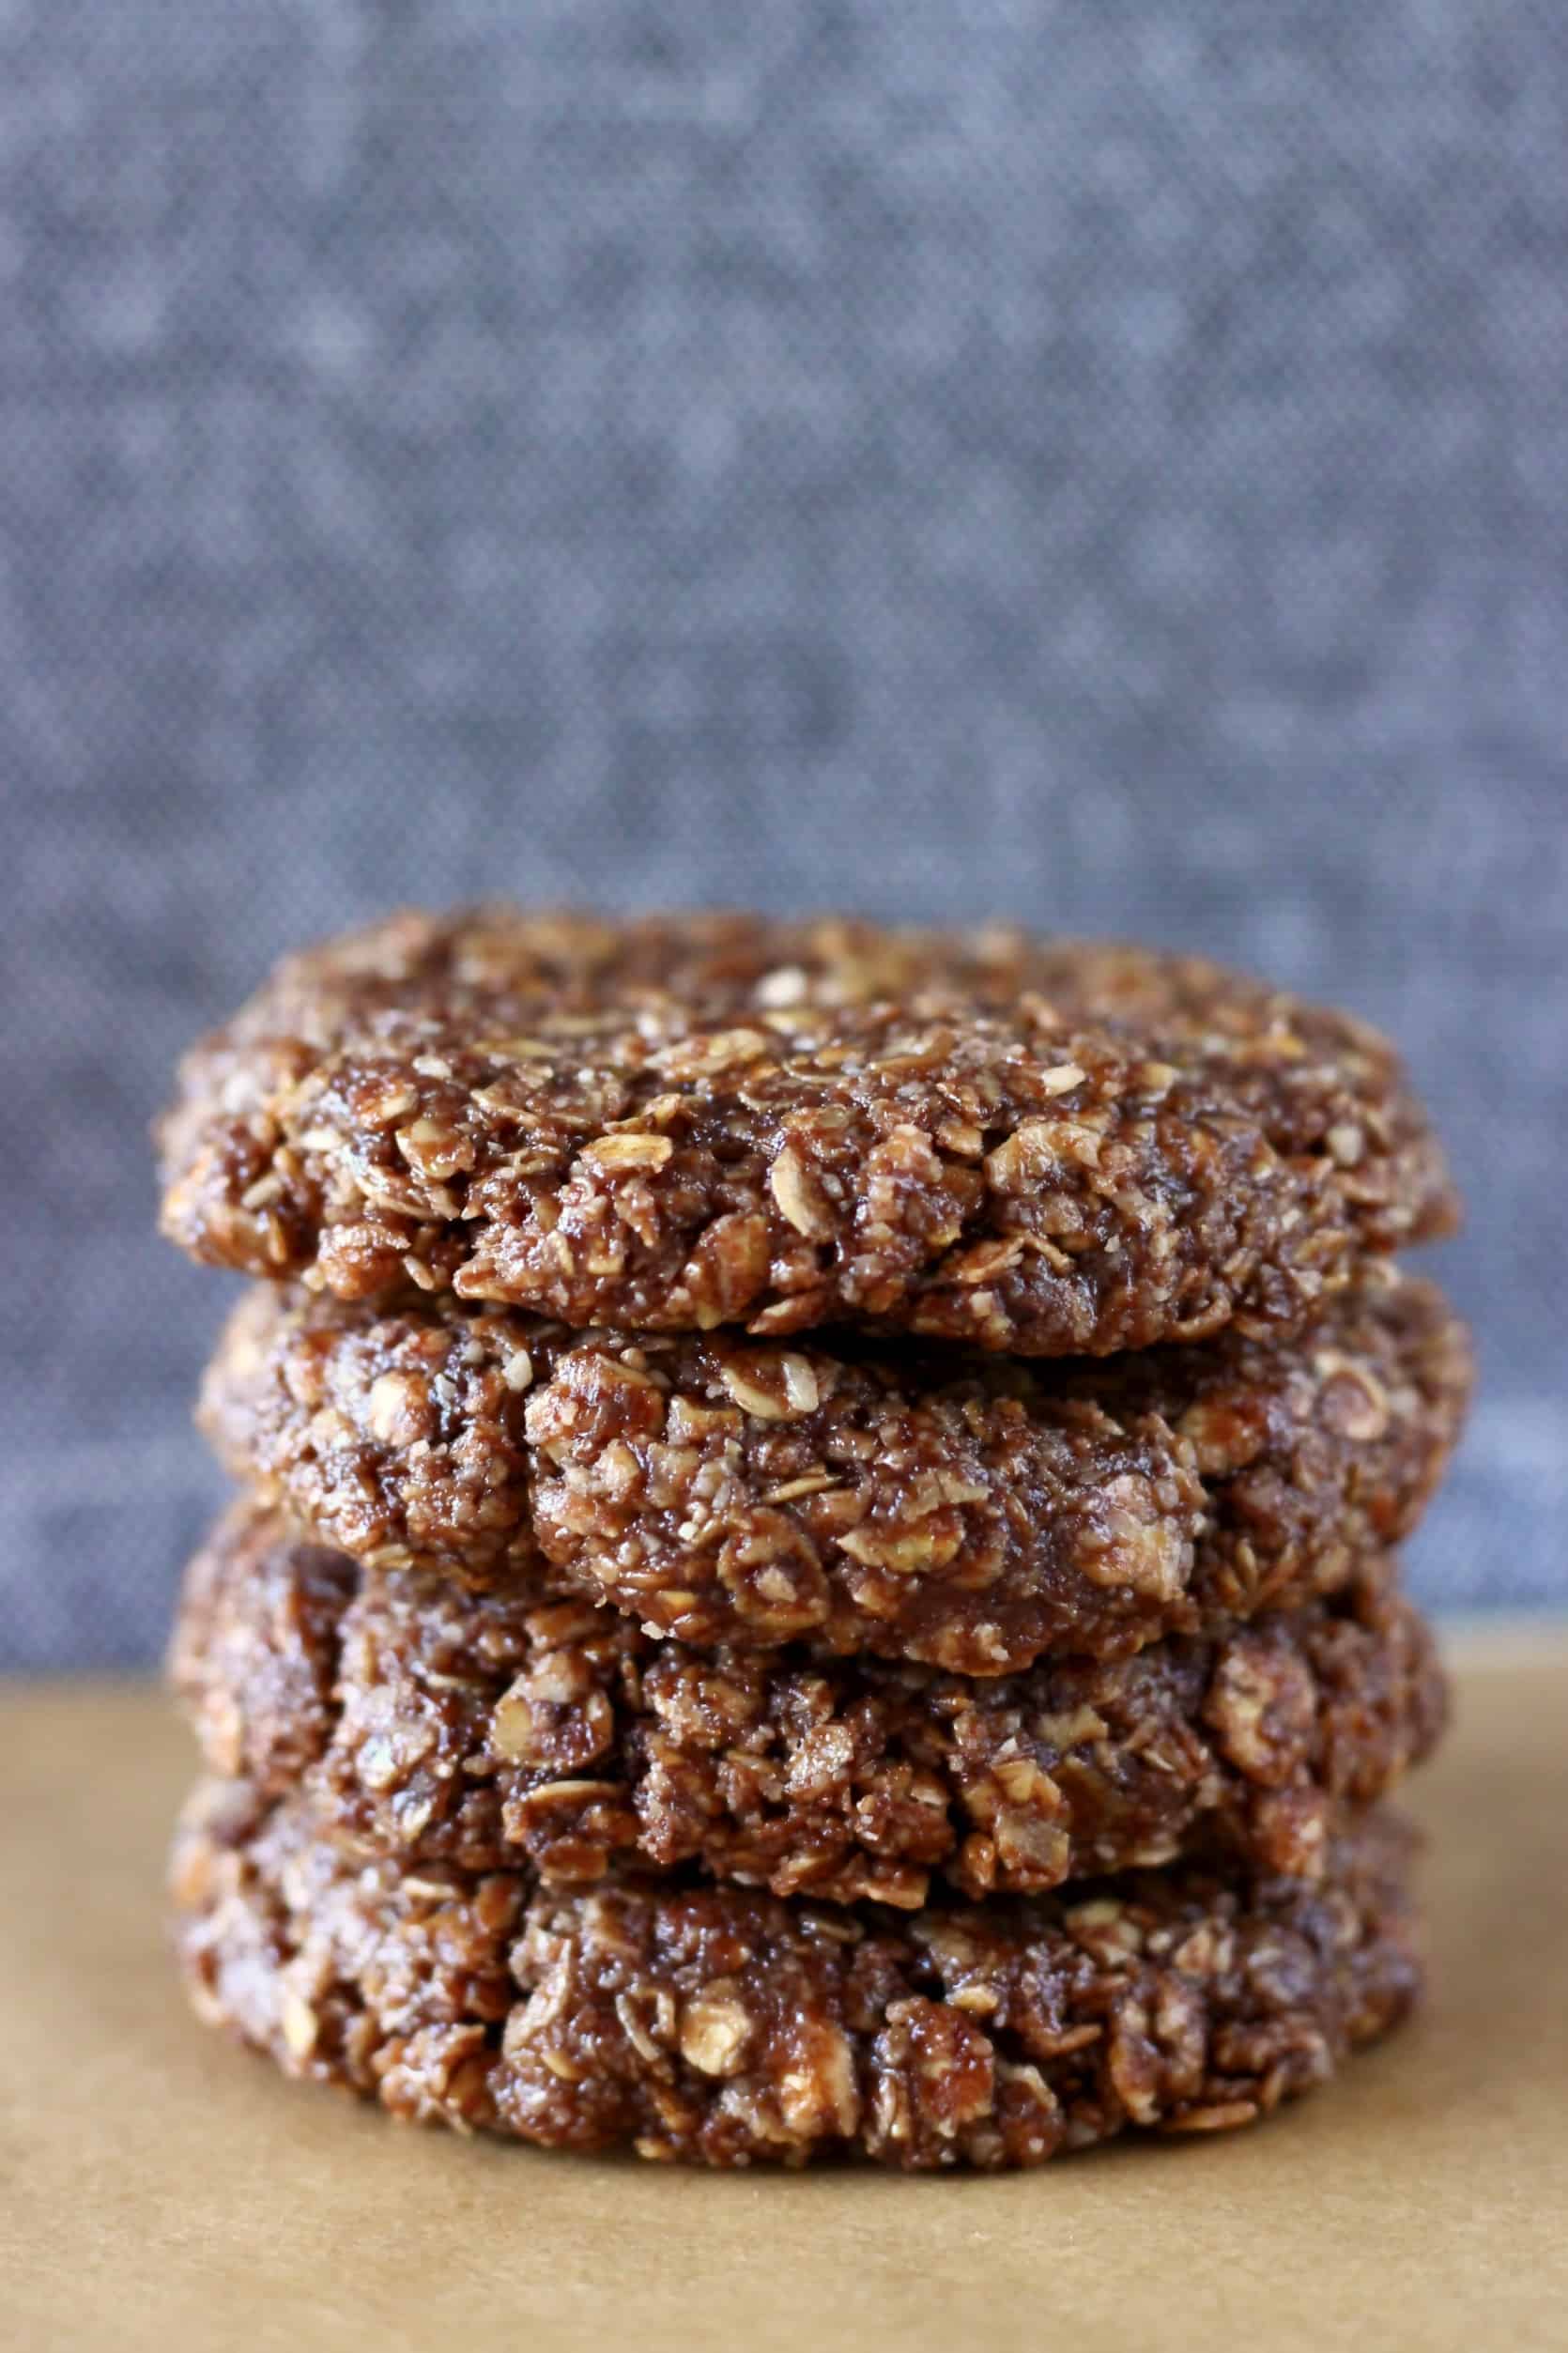 Four no-bake chocolate oatmeal cookies stacked on top of each other on a sheet of brown baking paper 